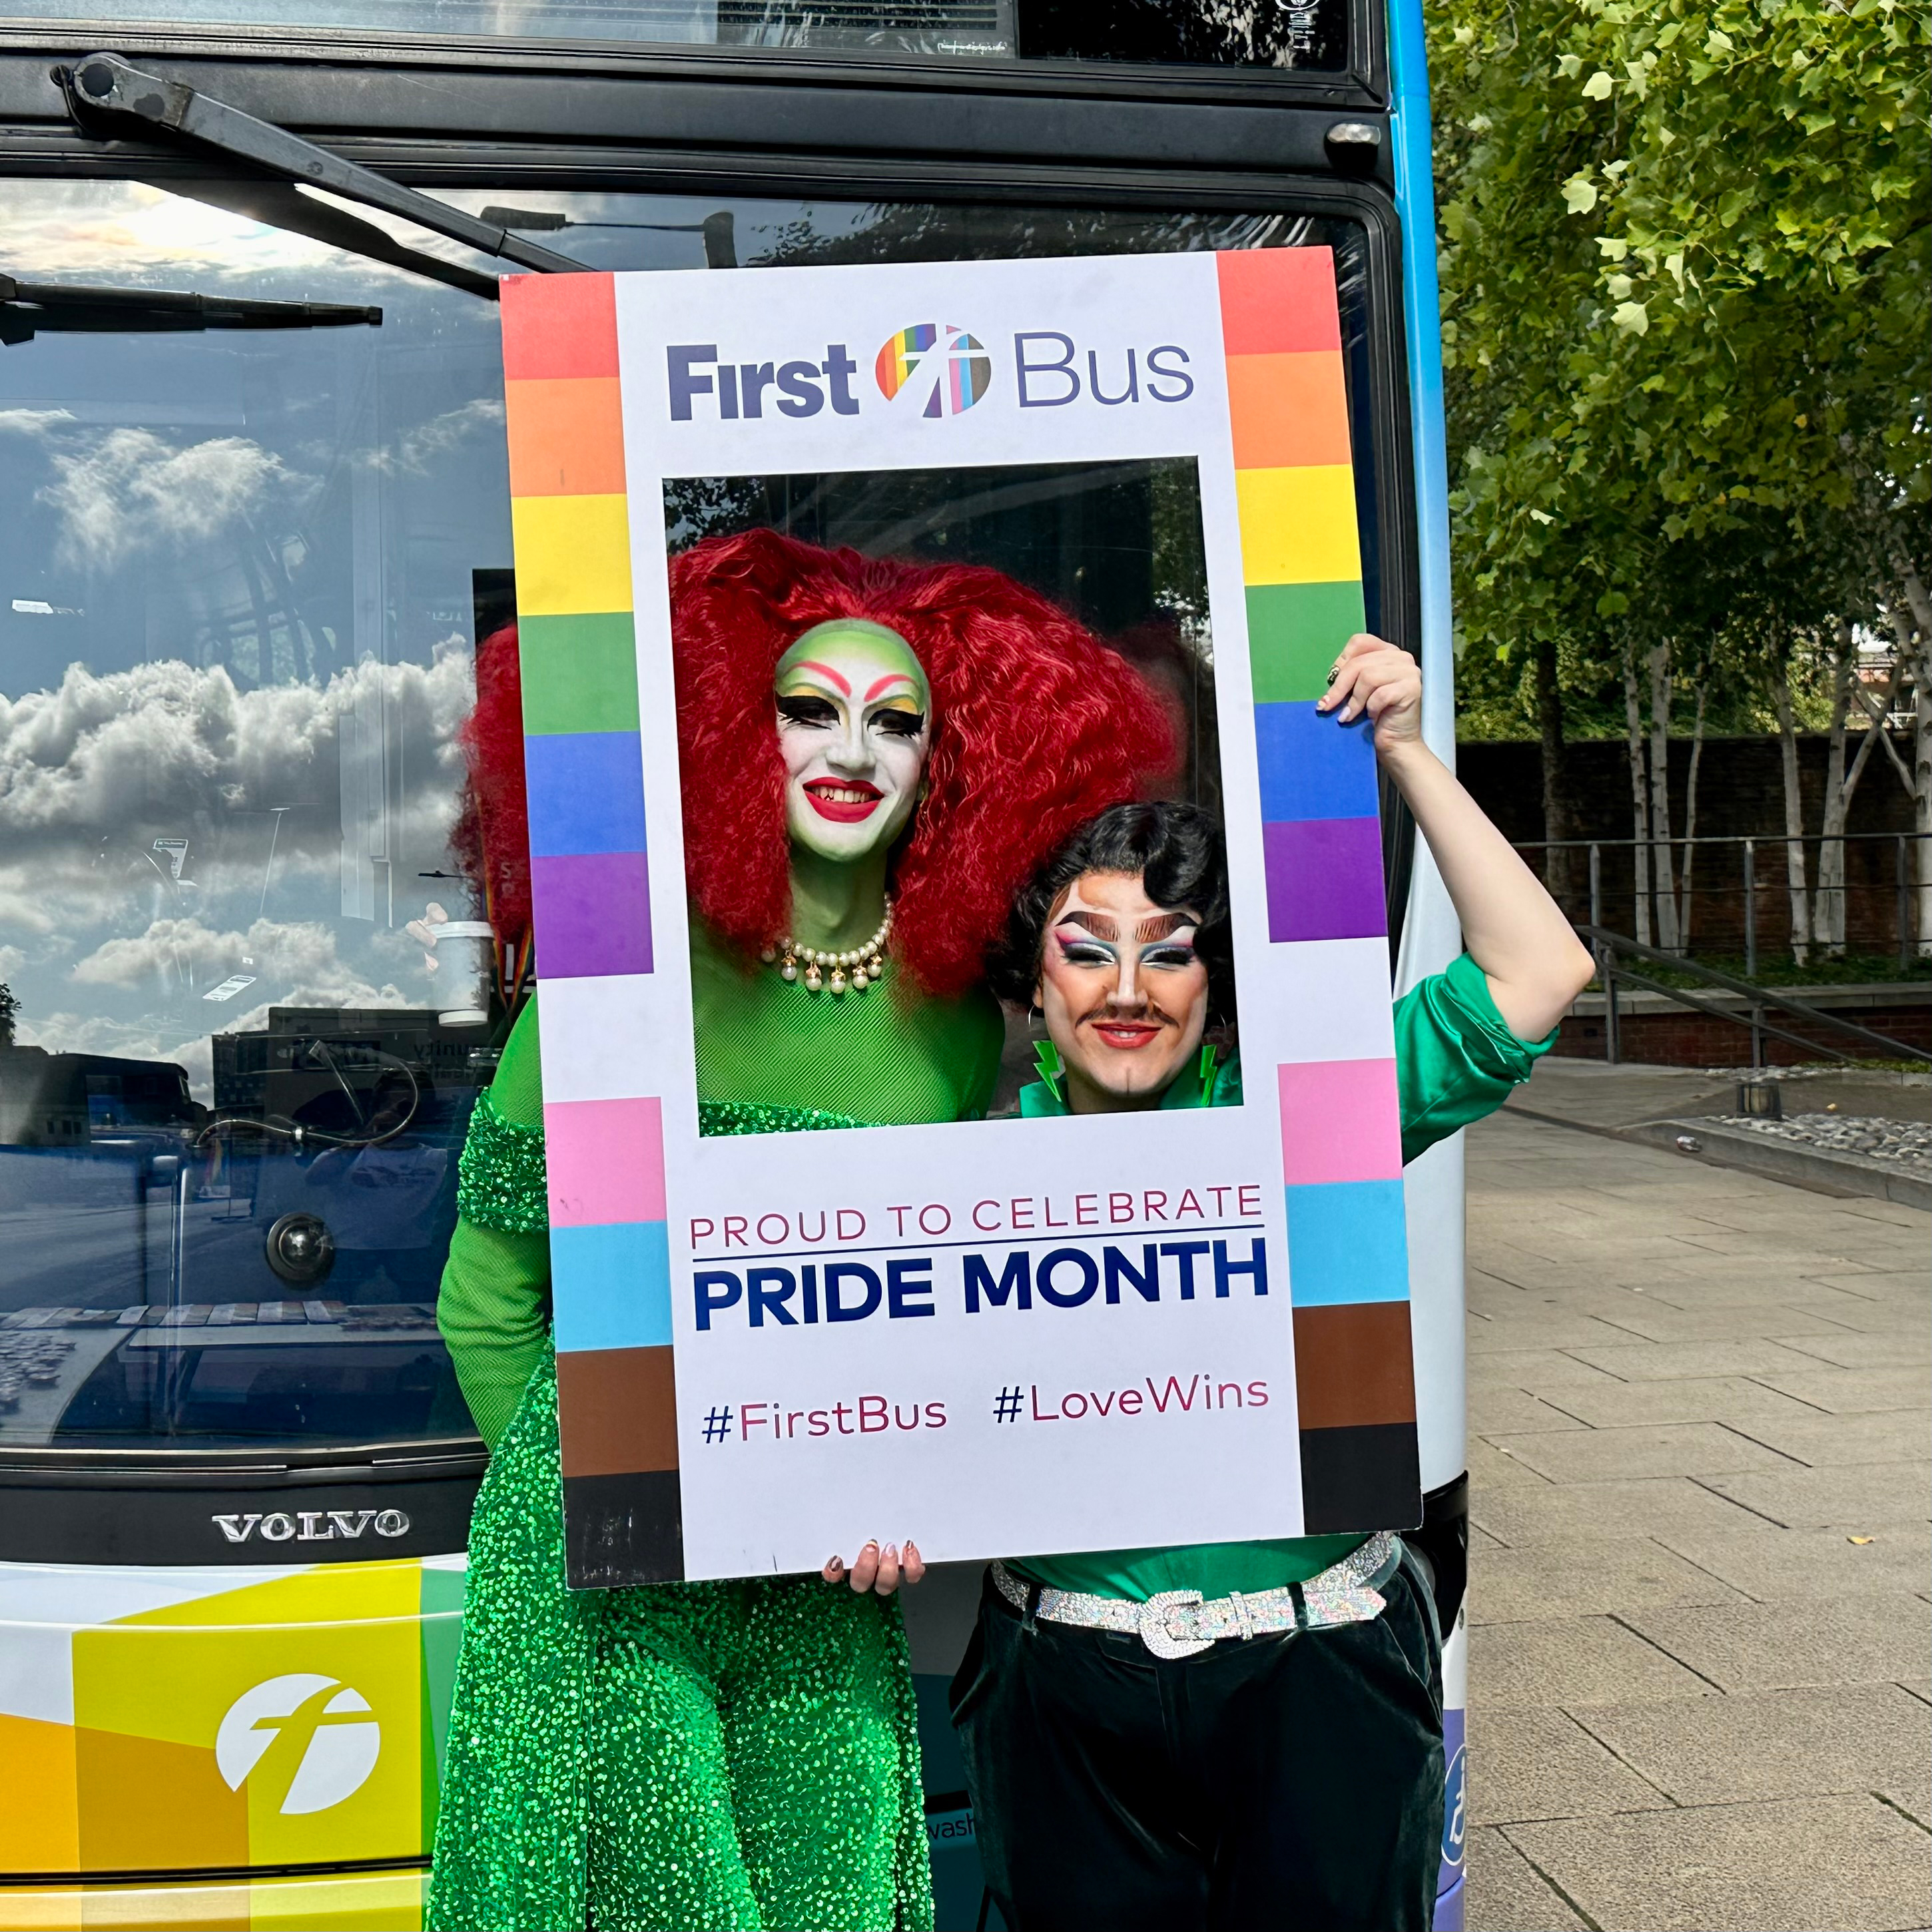 Drag queen Jester Mirage and drag king Will Power posing with the bus at the Norwich Pride event.